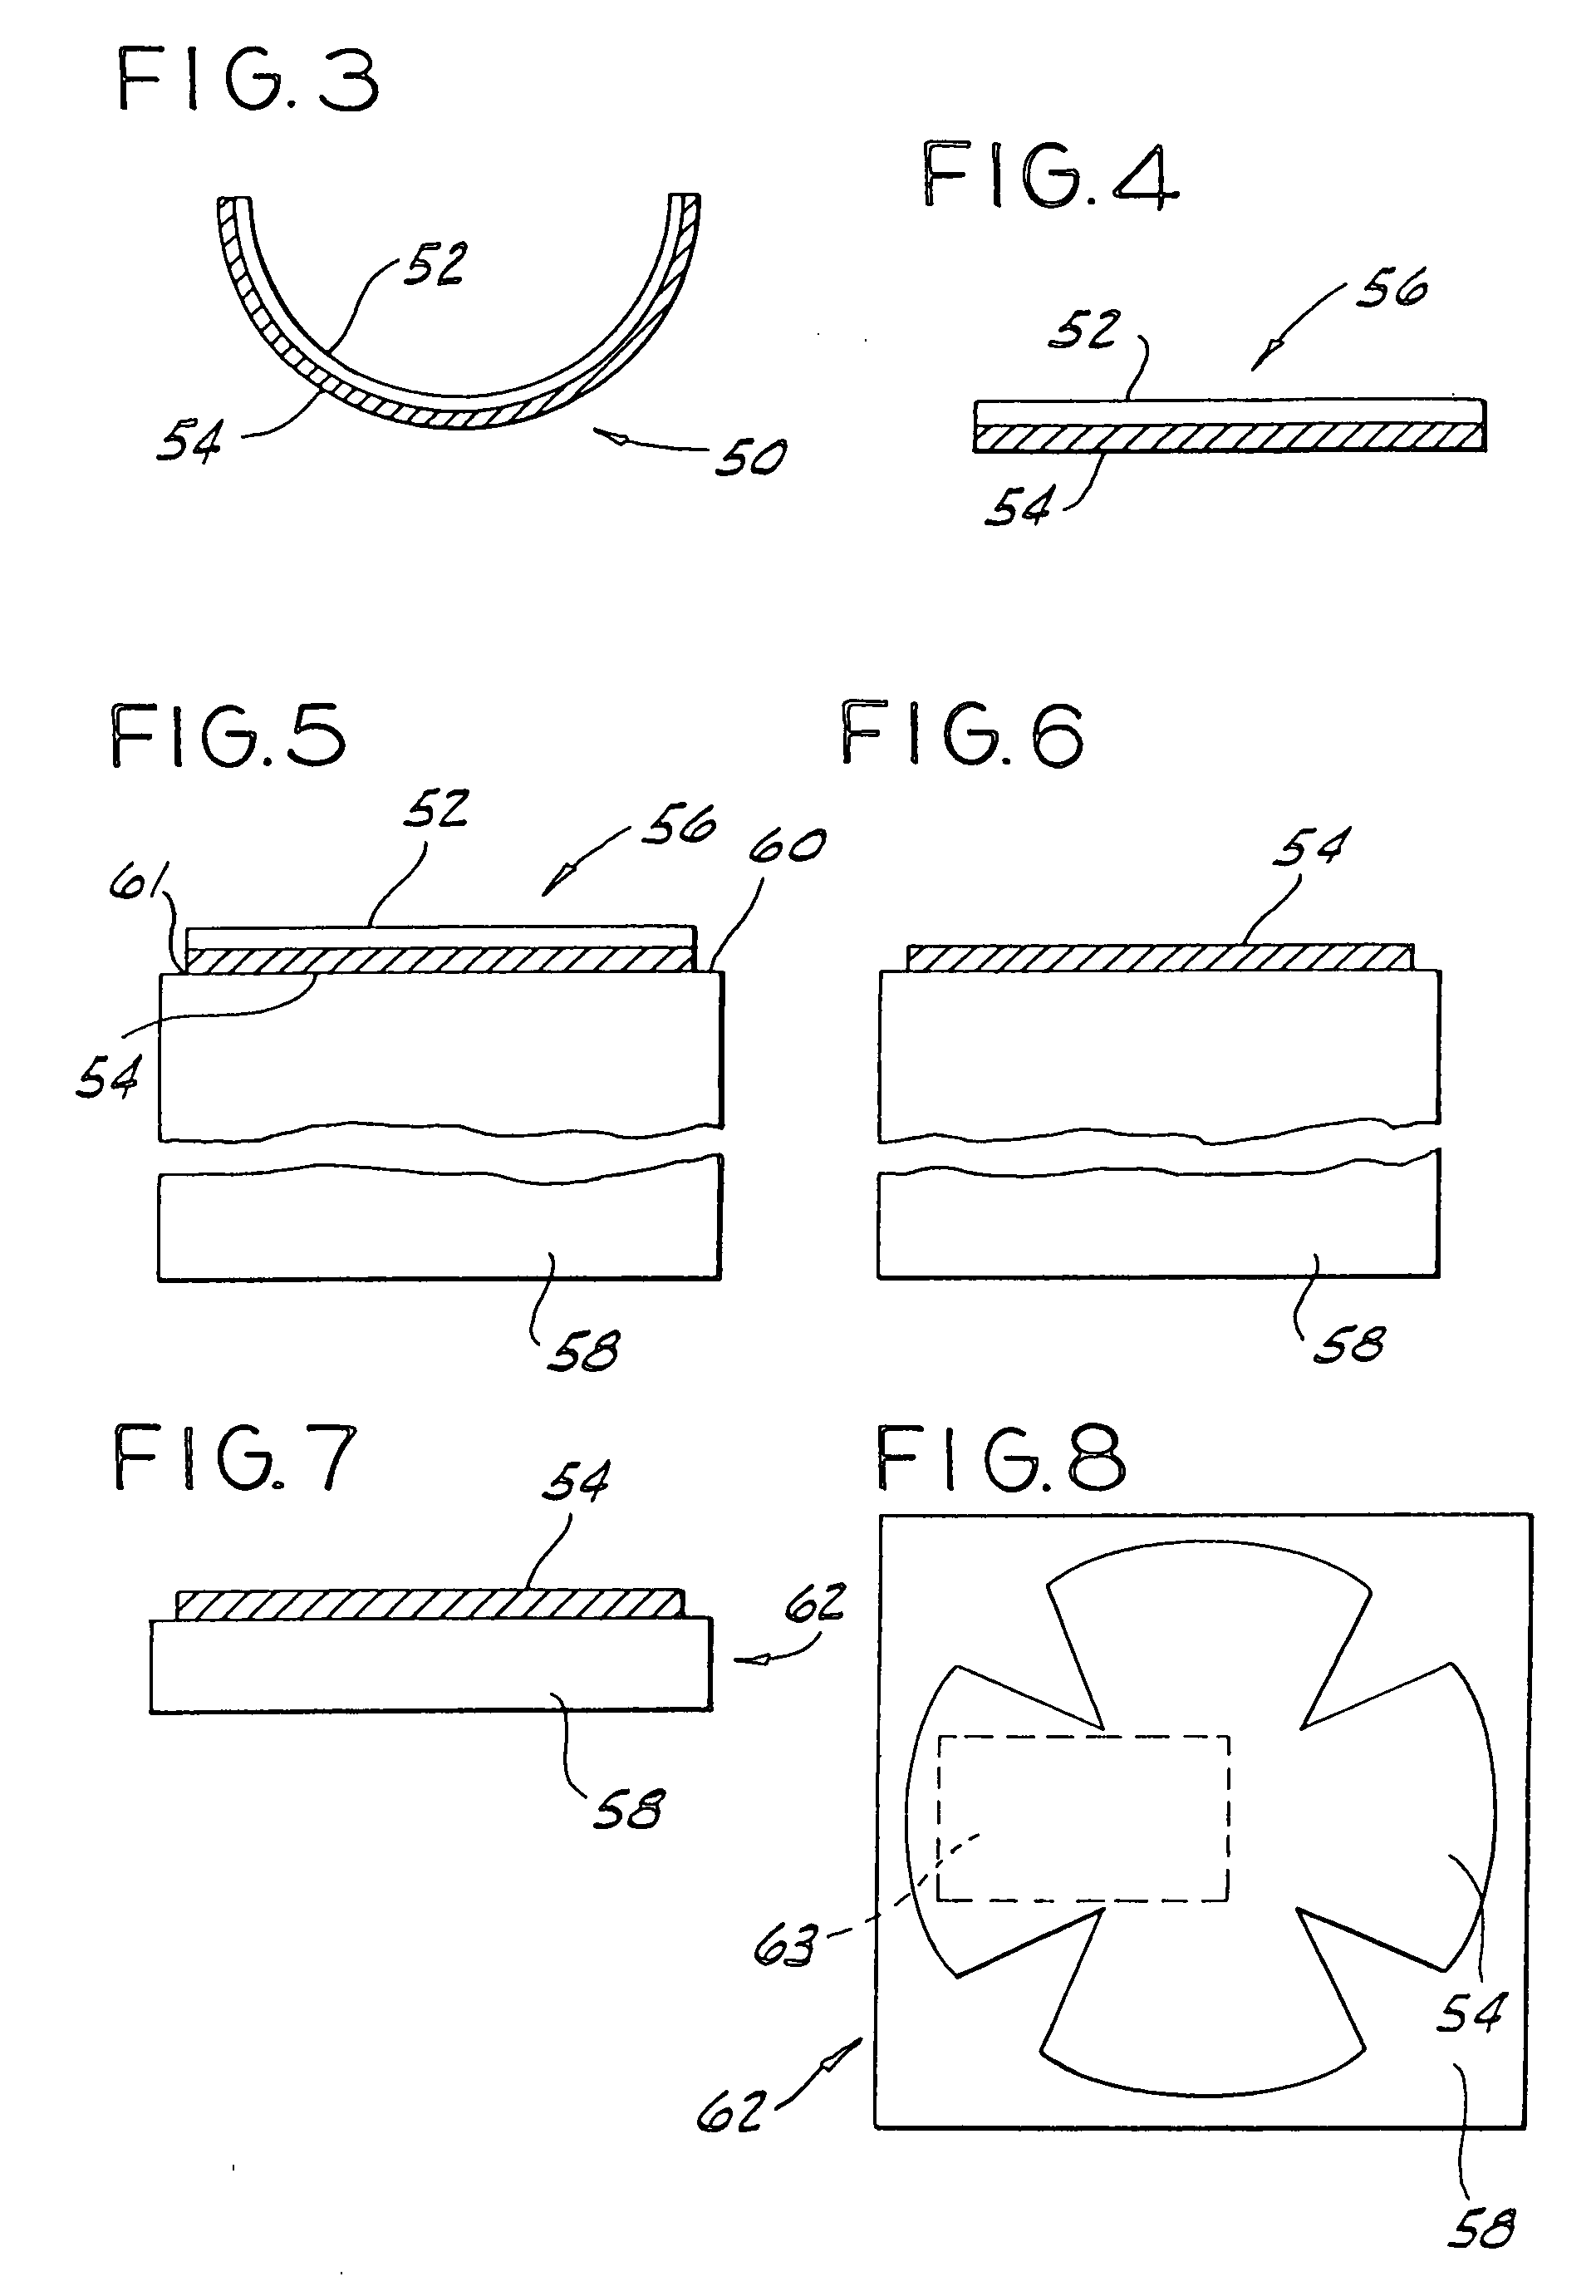 Retinal cell grafts and instrument for implanting